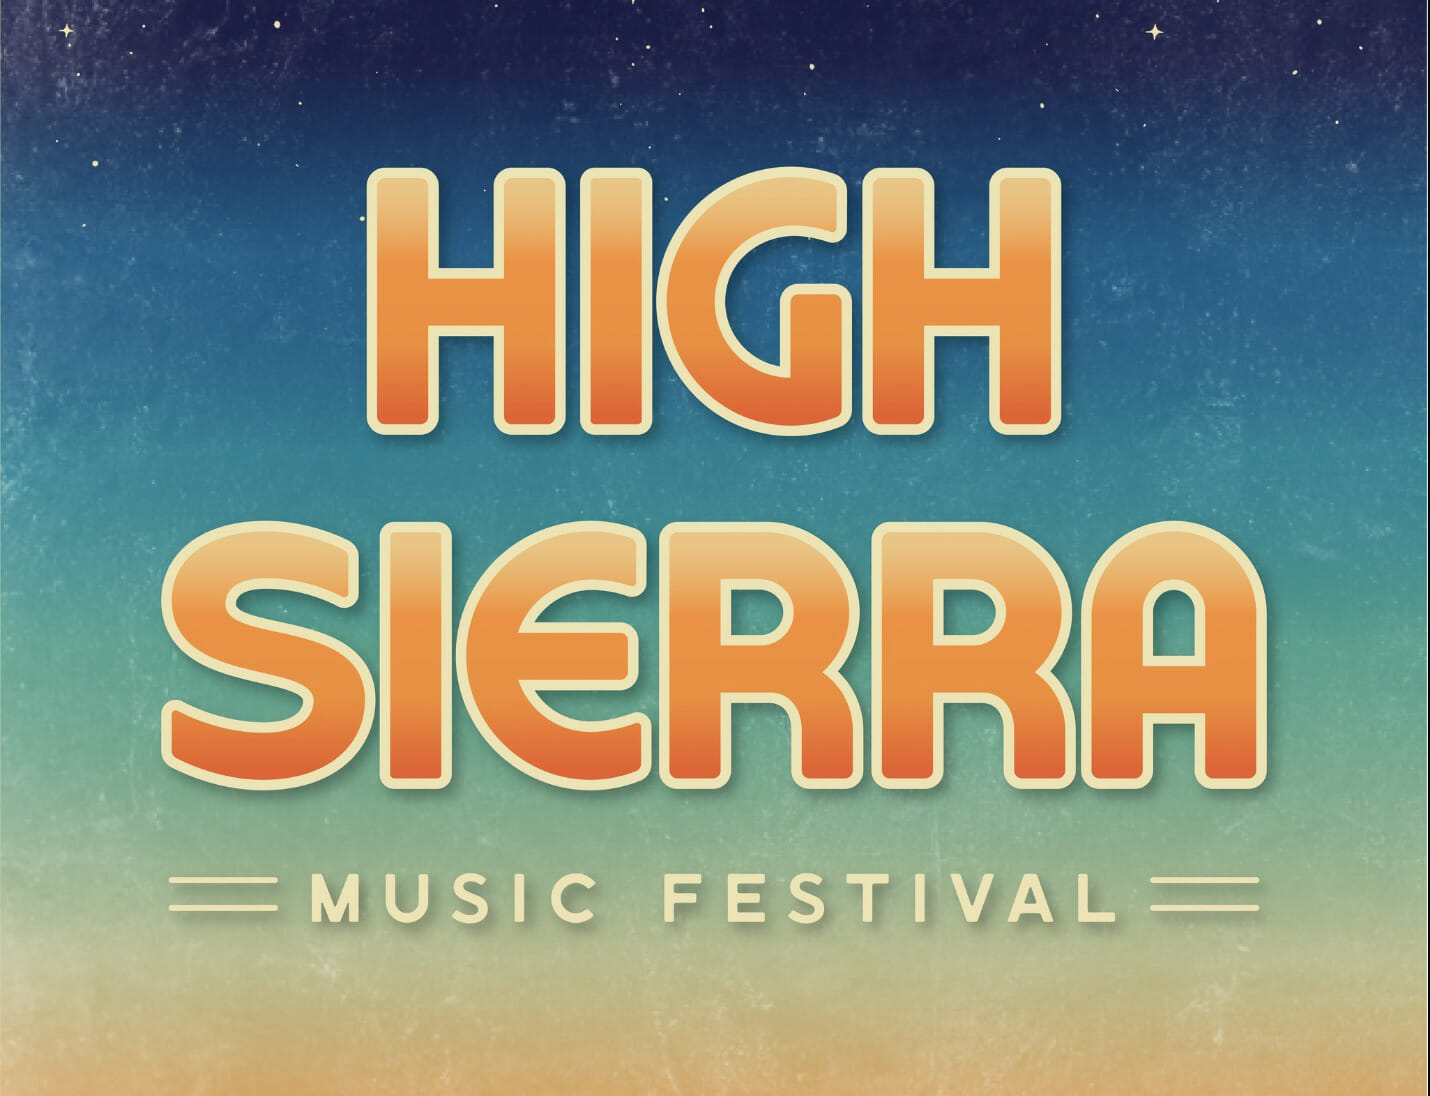 High Sierra Music Festival Delivers Late-Night Artist Lineup: Galactic, moe., The Nth Power and More